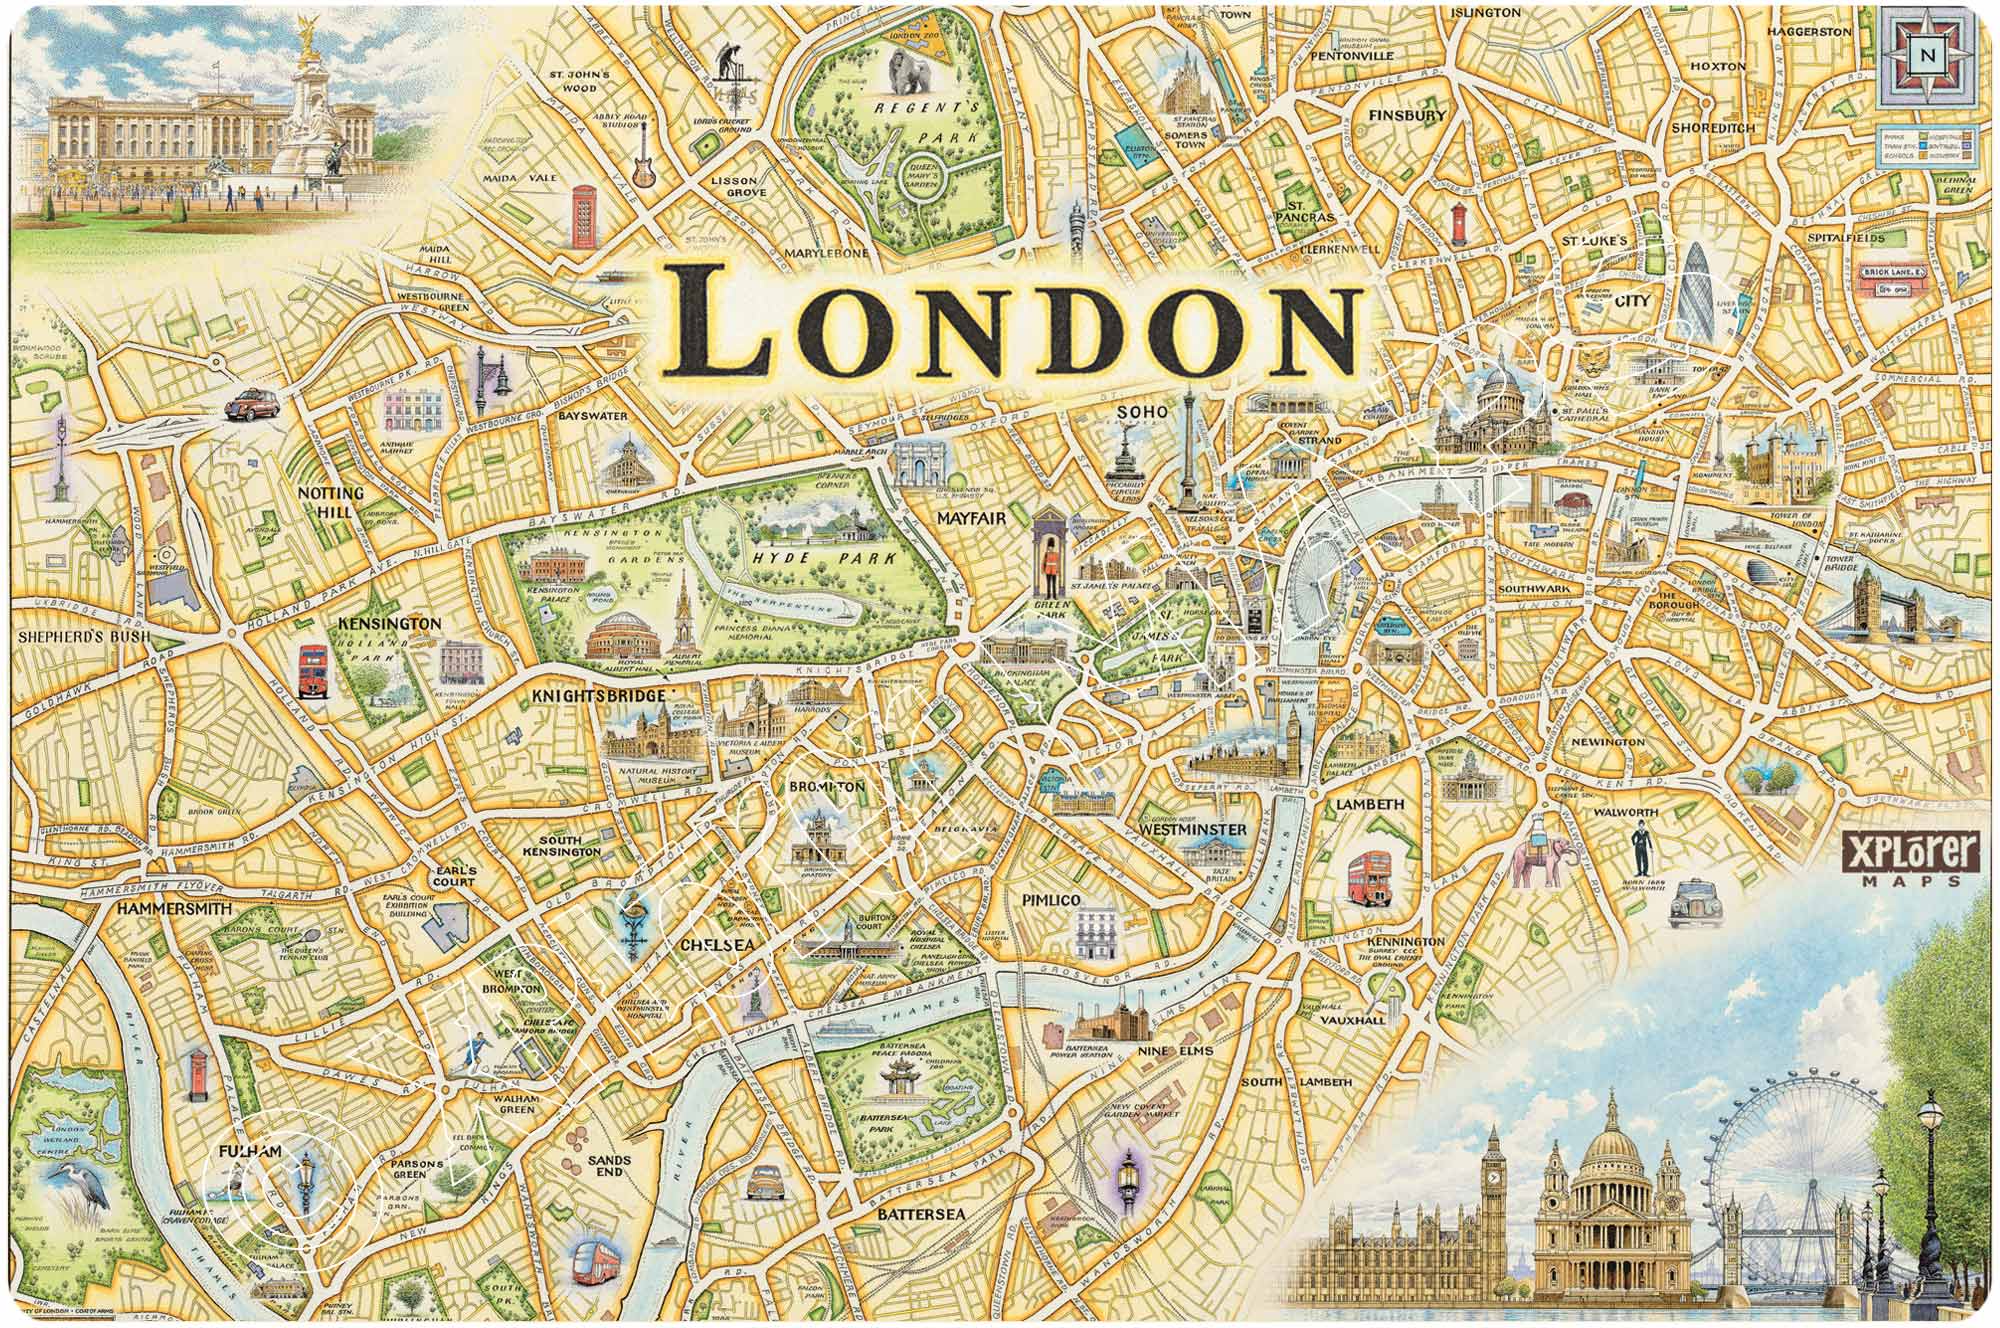 London Map Wood Sign by Xplorer Maps. The map features Big Ben, Buckingham Palace, Tower Bridge, and The London Eye, or the Millennium Wheel, Farris Wheel.